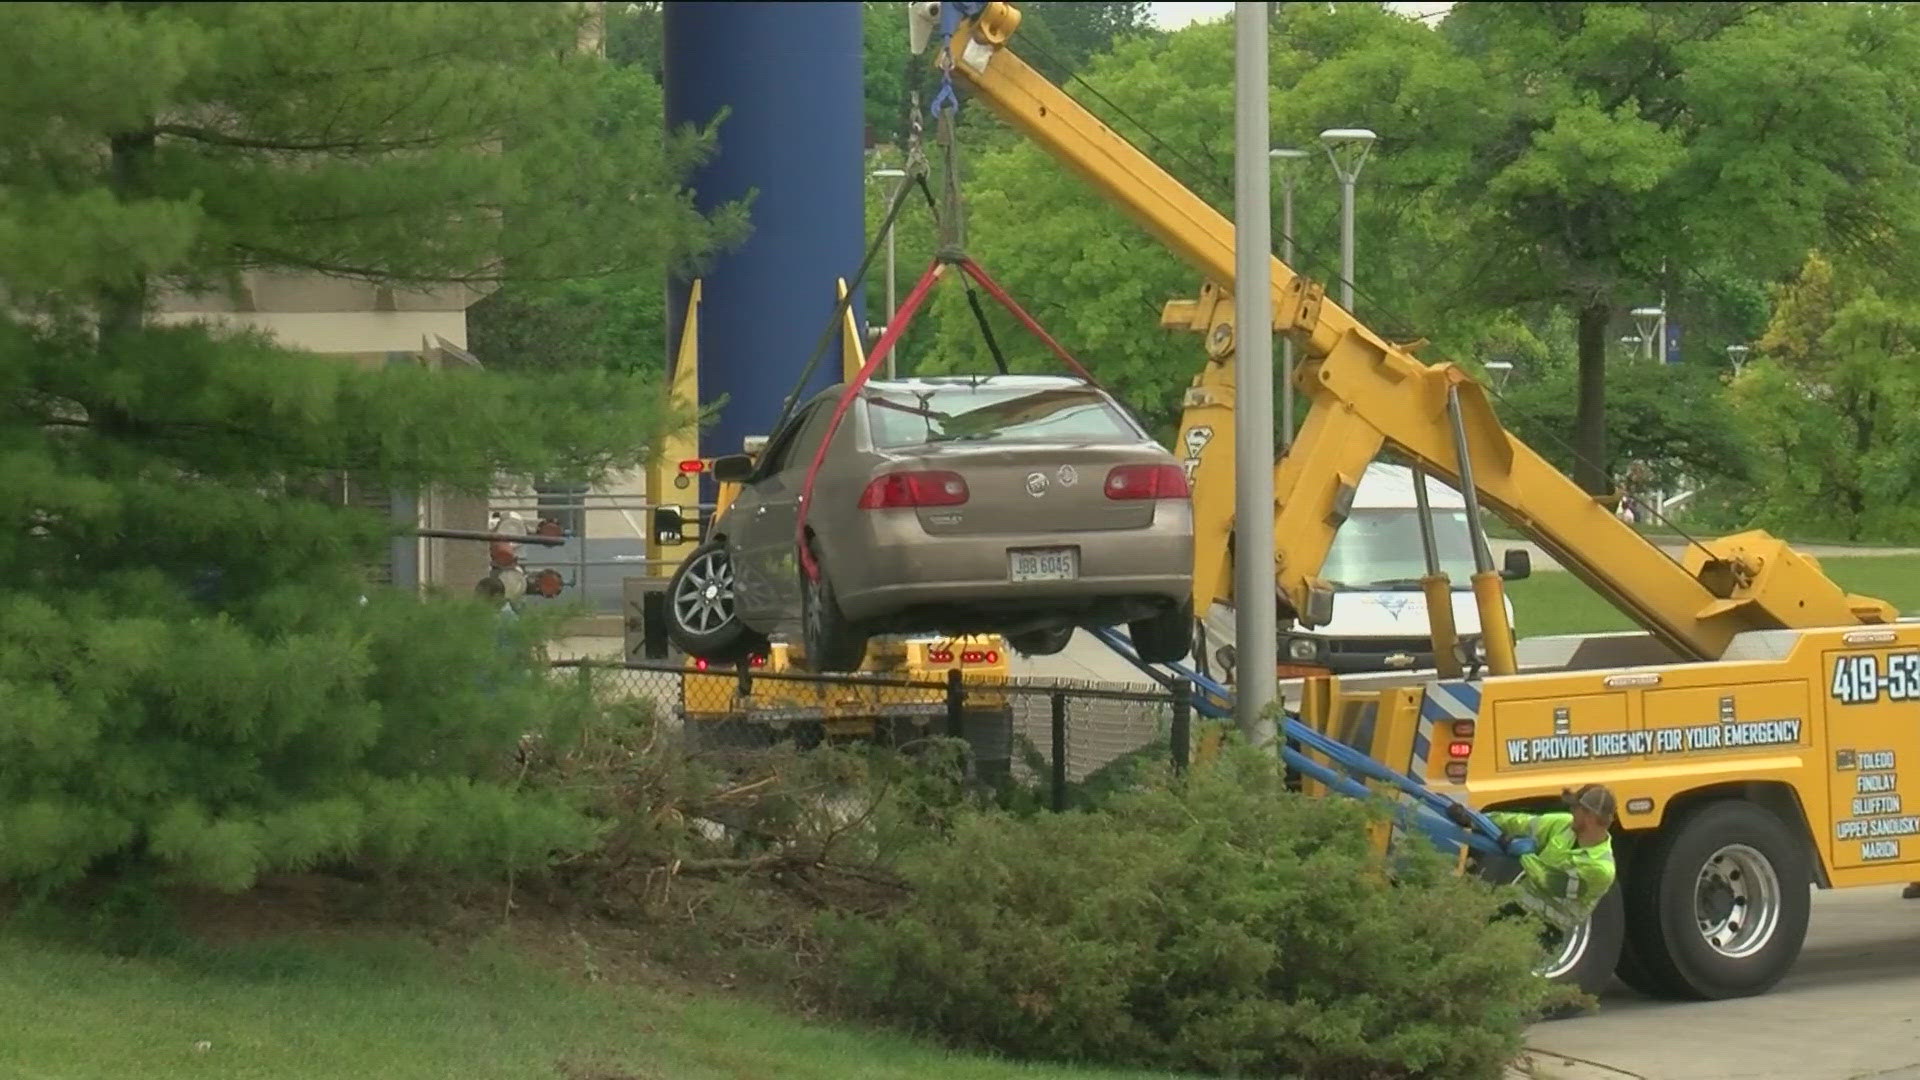 The driver was taken to the hospital with minor injuries. Bedford High School's commencement ceremony began at 2 p.m. as planned after crews secured the scene.